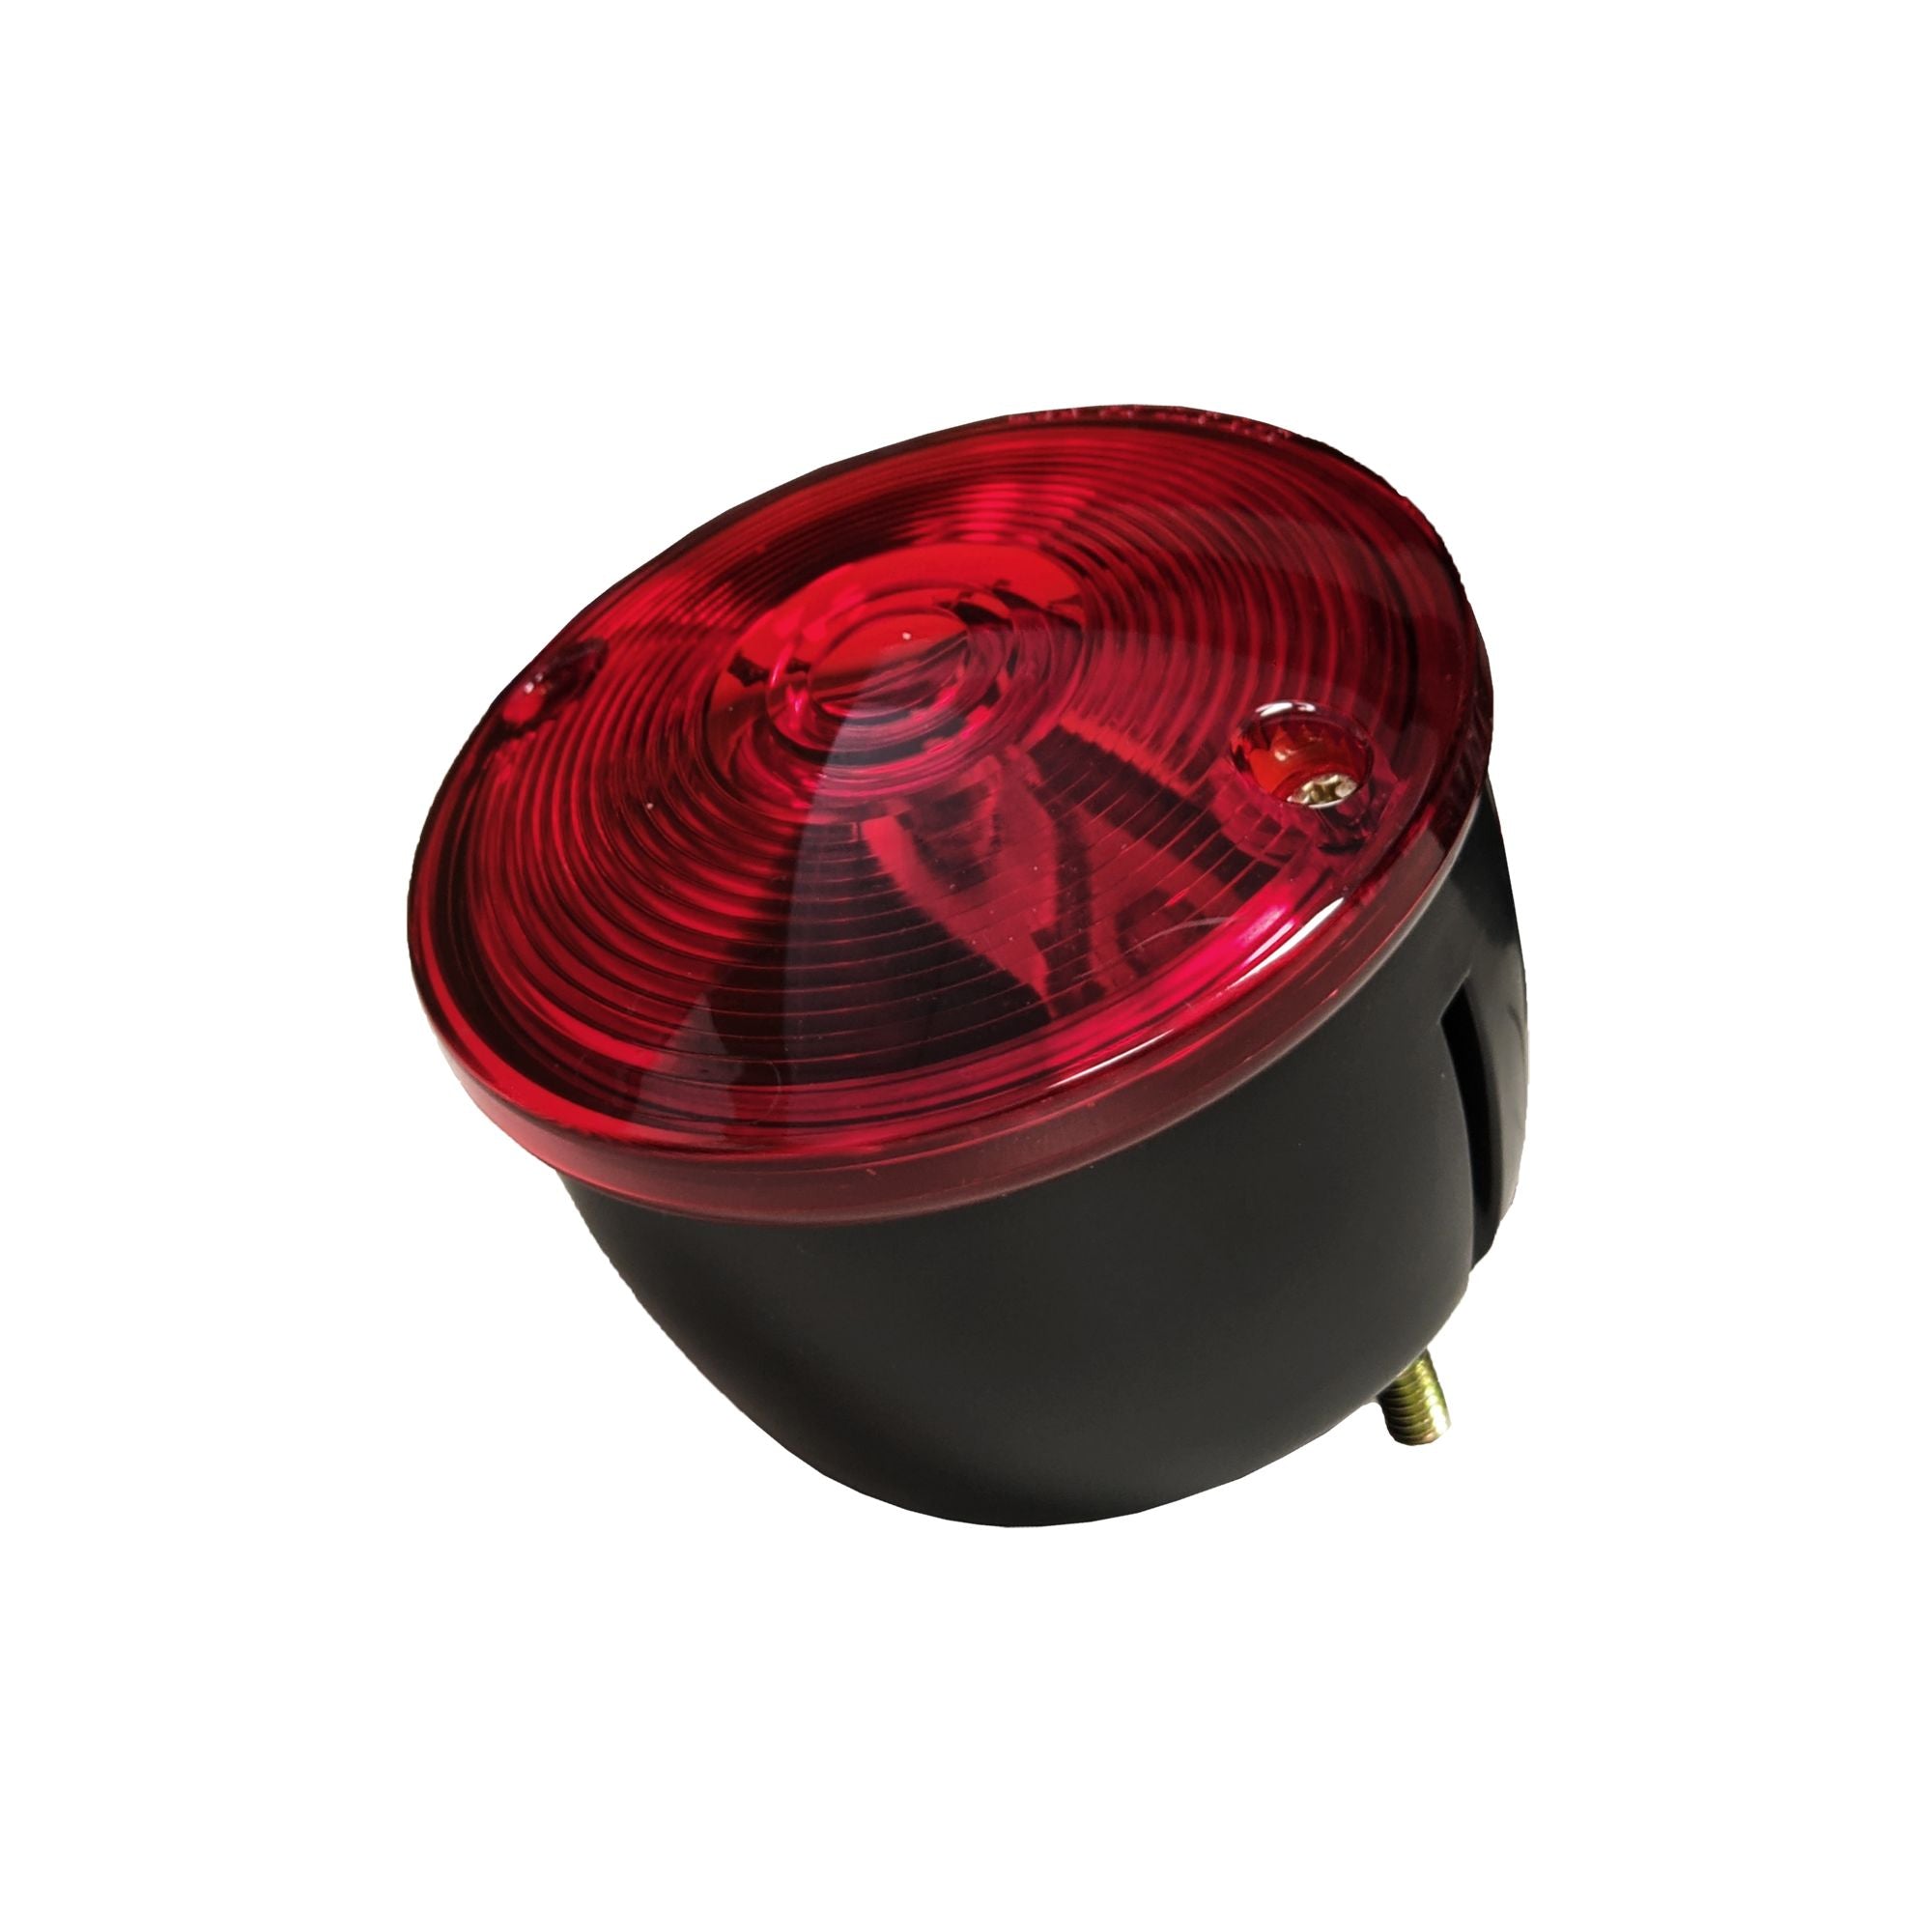 Uni-Bond TL4401 - Stop/Turn/Tail Trailer Lamp for Vehicles under 80″ Red Round 4"